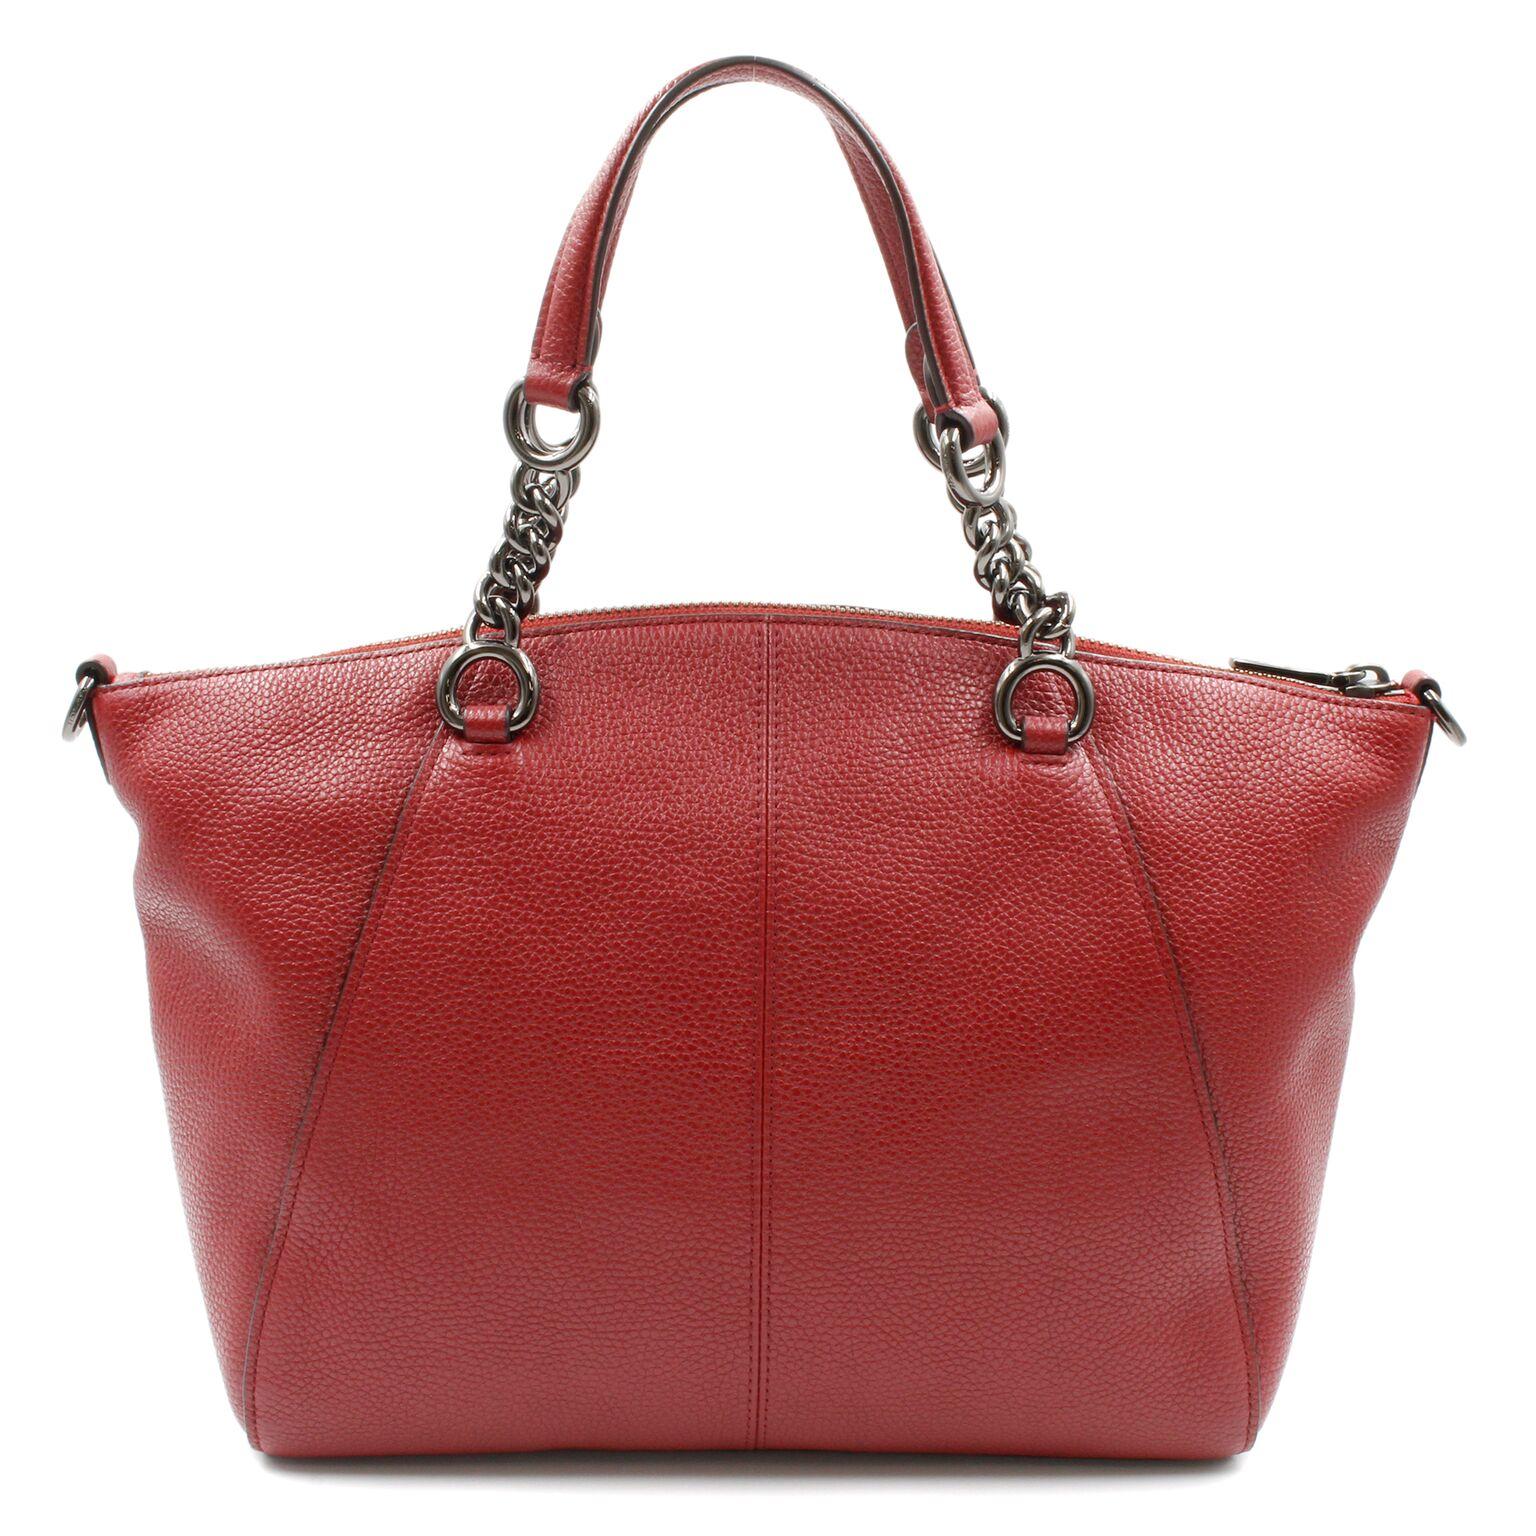 Coach Prairie Satchel Burgundy Women's Handbag 59501. Crafted in soft, lightweight pebbled leather with a bit of sheen. Very refined hardware complements the minimalist design, the slender strap detaches for multiple wearing options. 
Details: